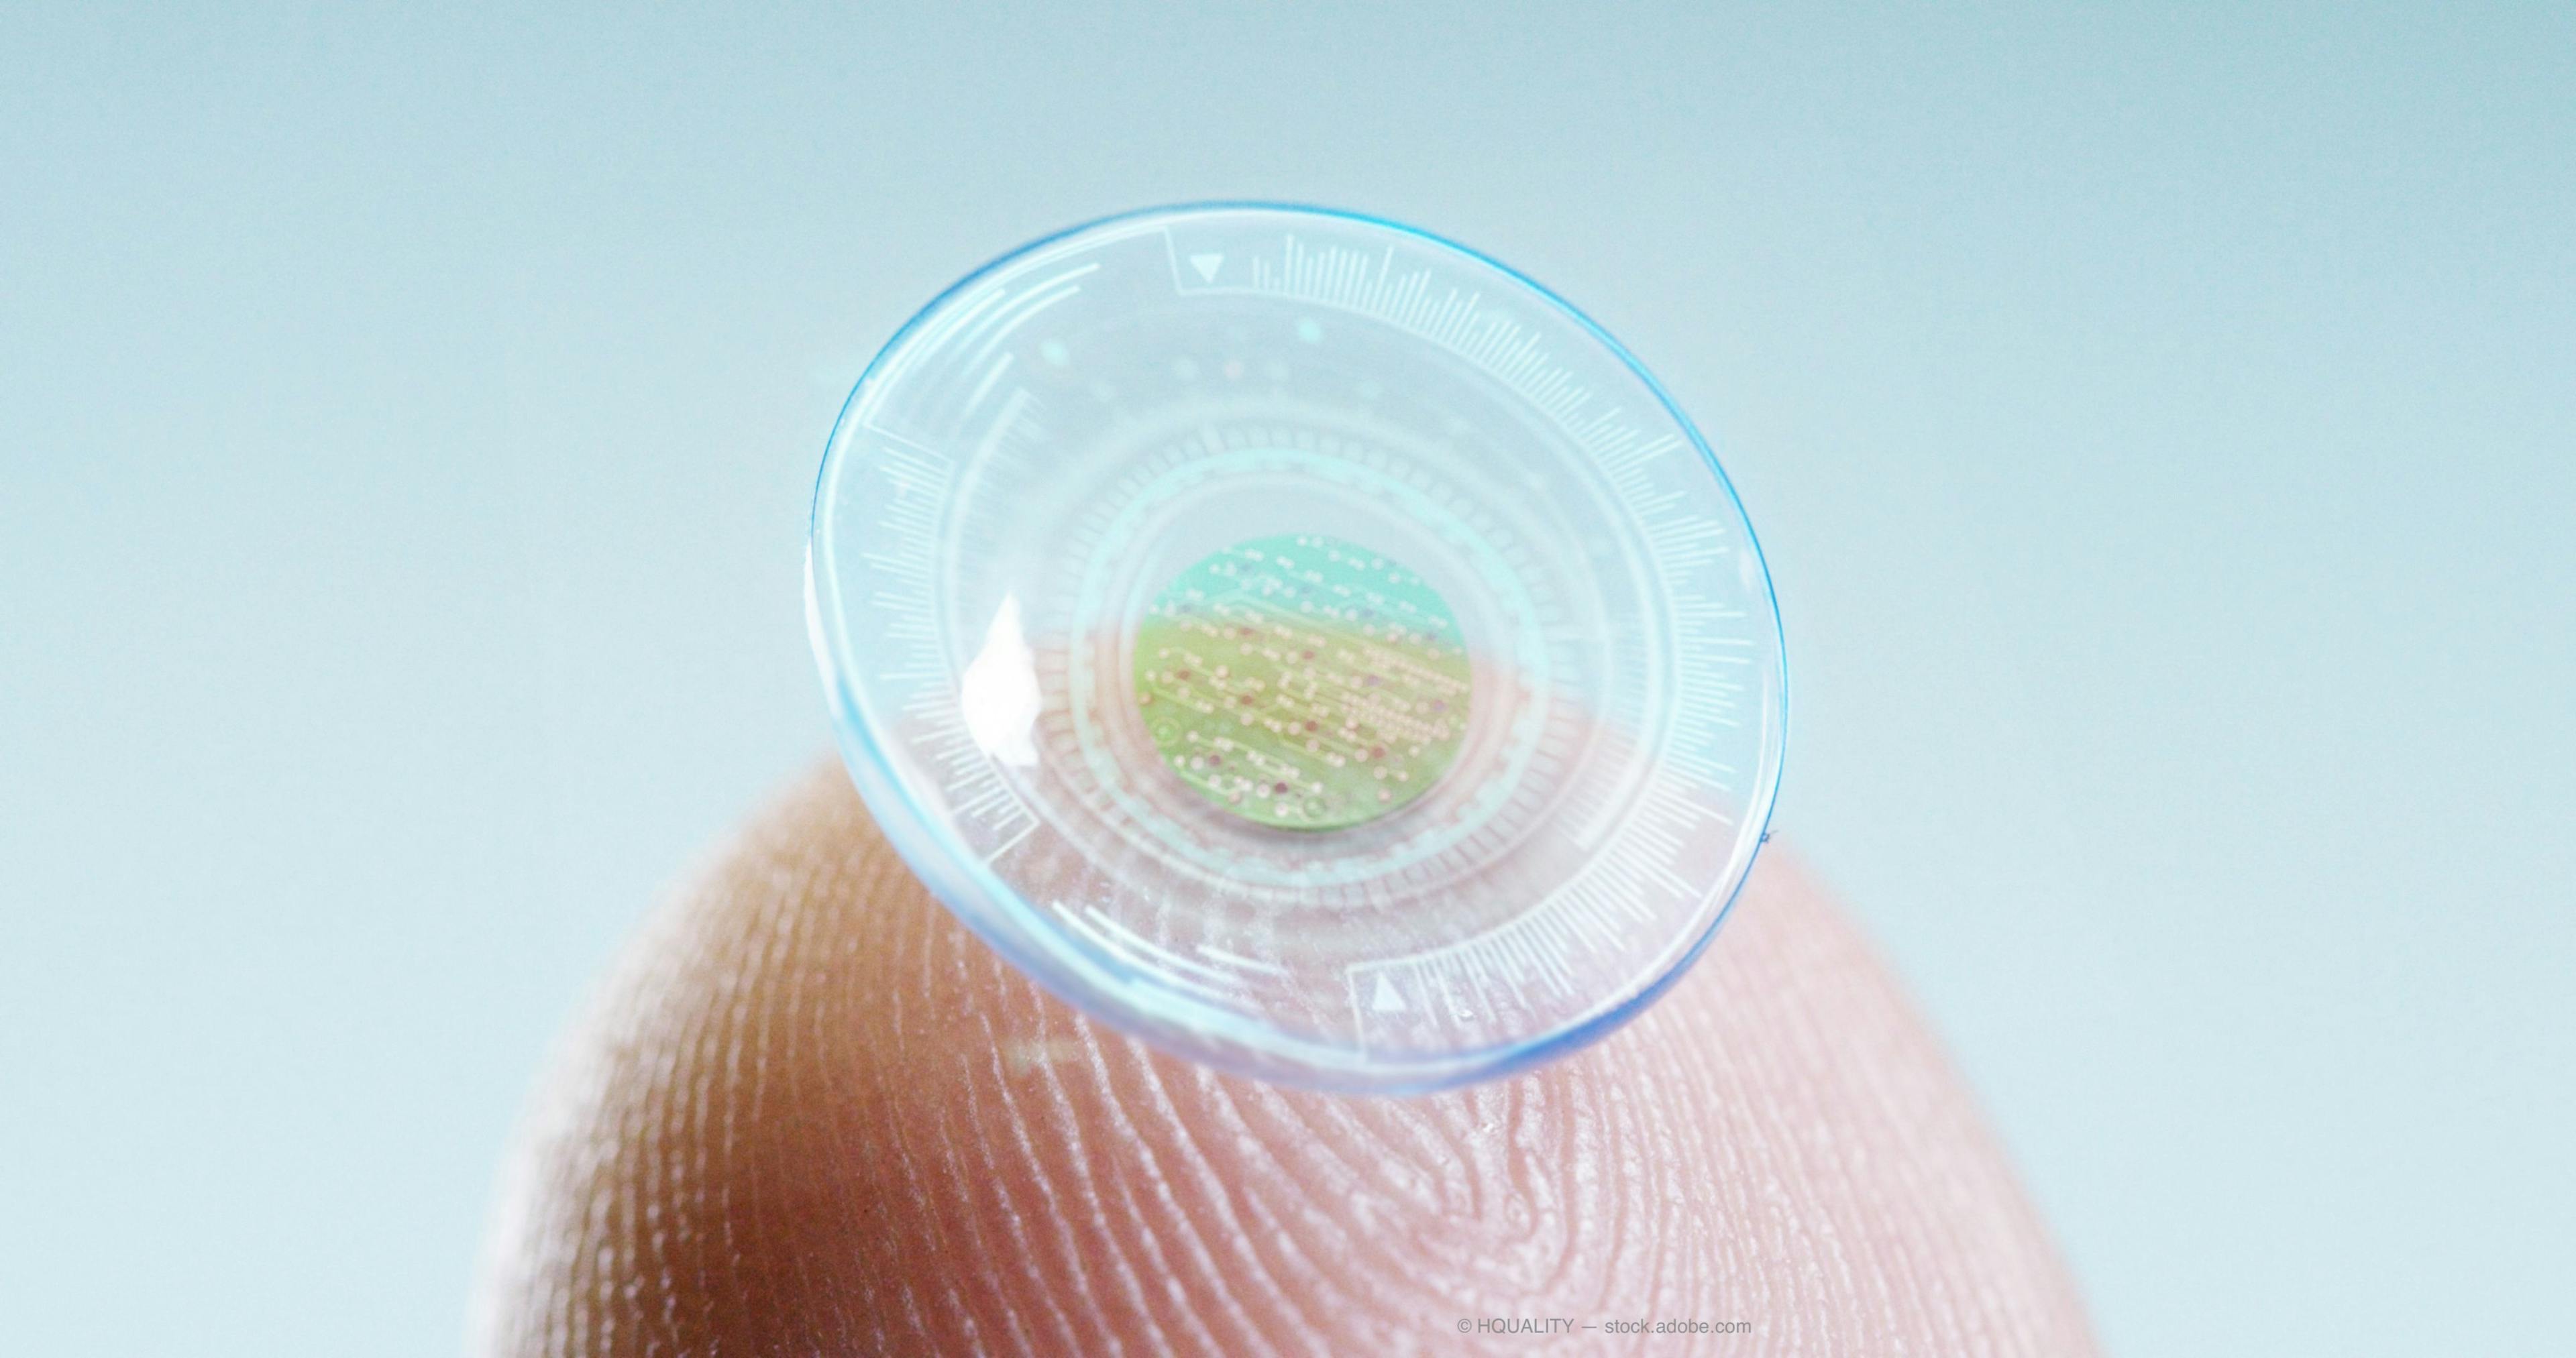 Researchers are investigating a 3D-printed self-moisturizing contact lens that could be a catalyst for the development of next-generation contact lens-based medical devices.